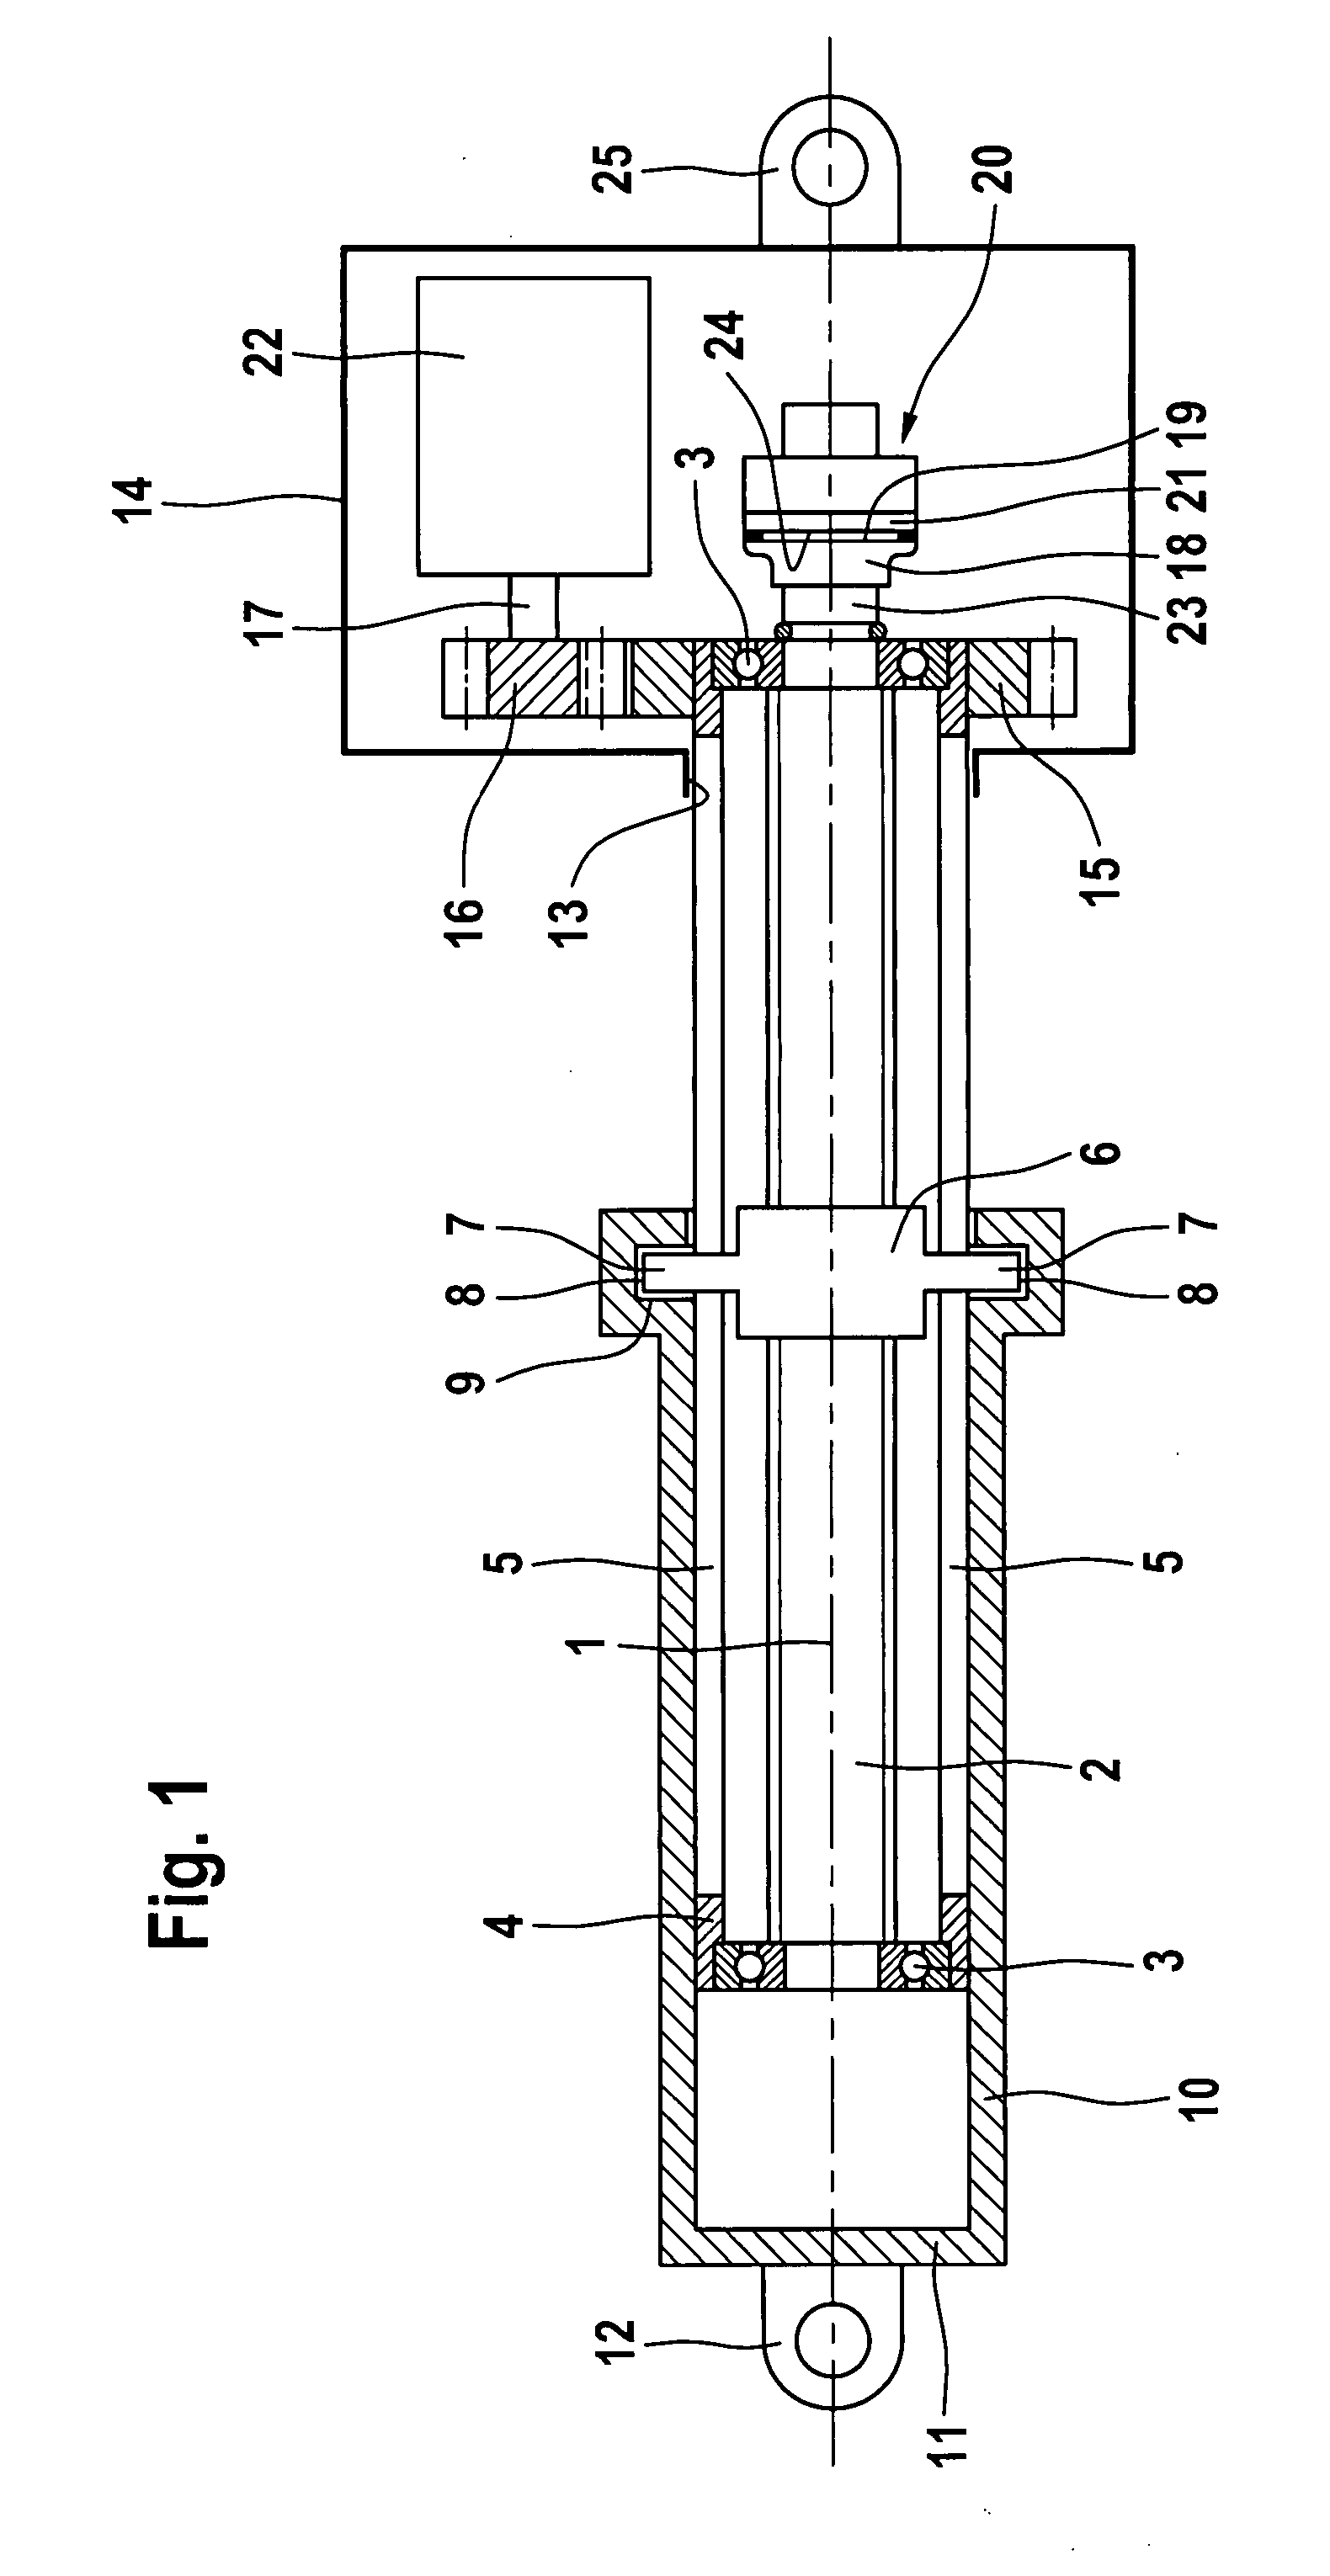 Spindle drive for a movable component, the spindle drive being drivable by a drive